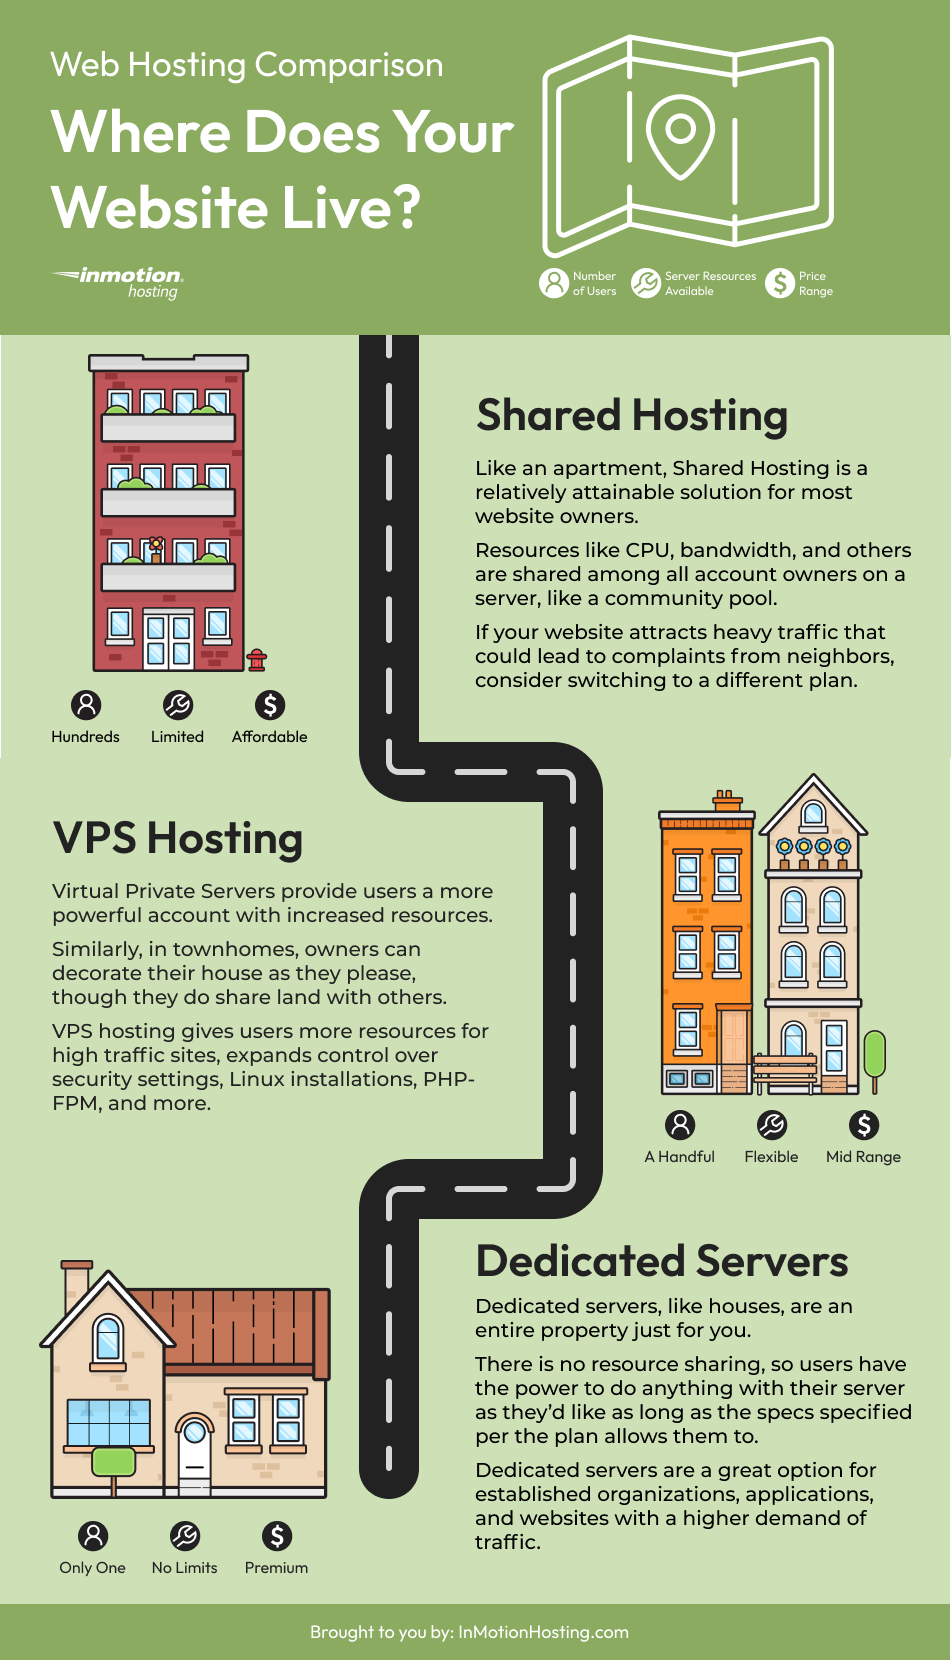 Learn the differences between Shared, VPS, and Dedicated hosting plans.